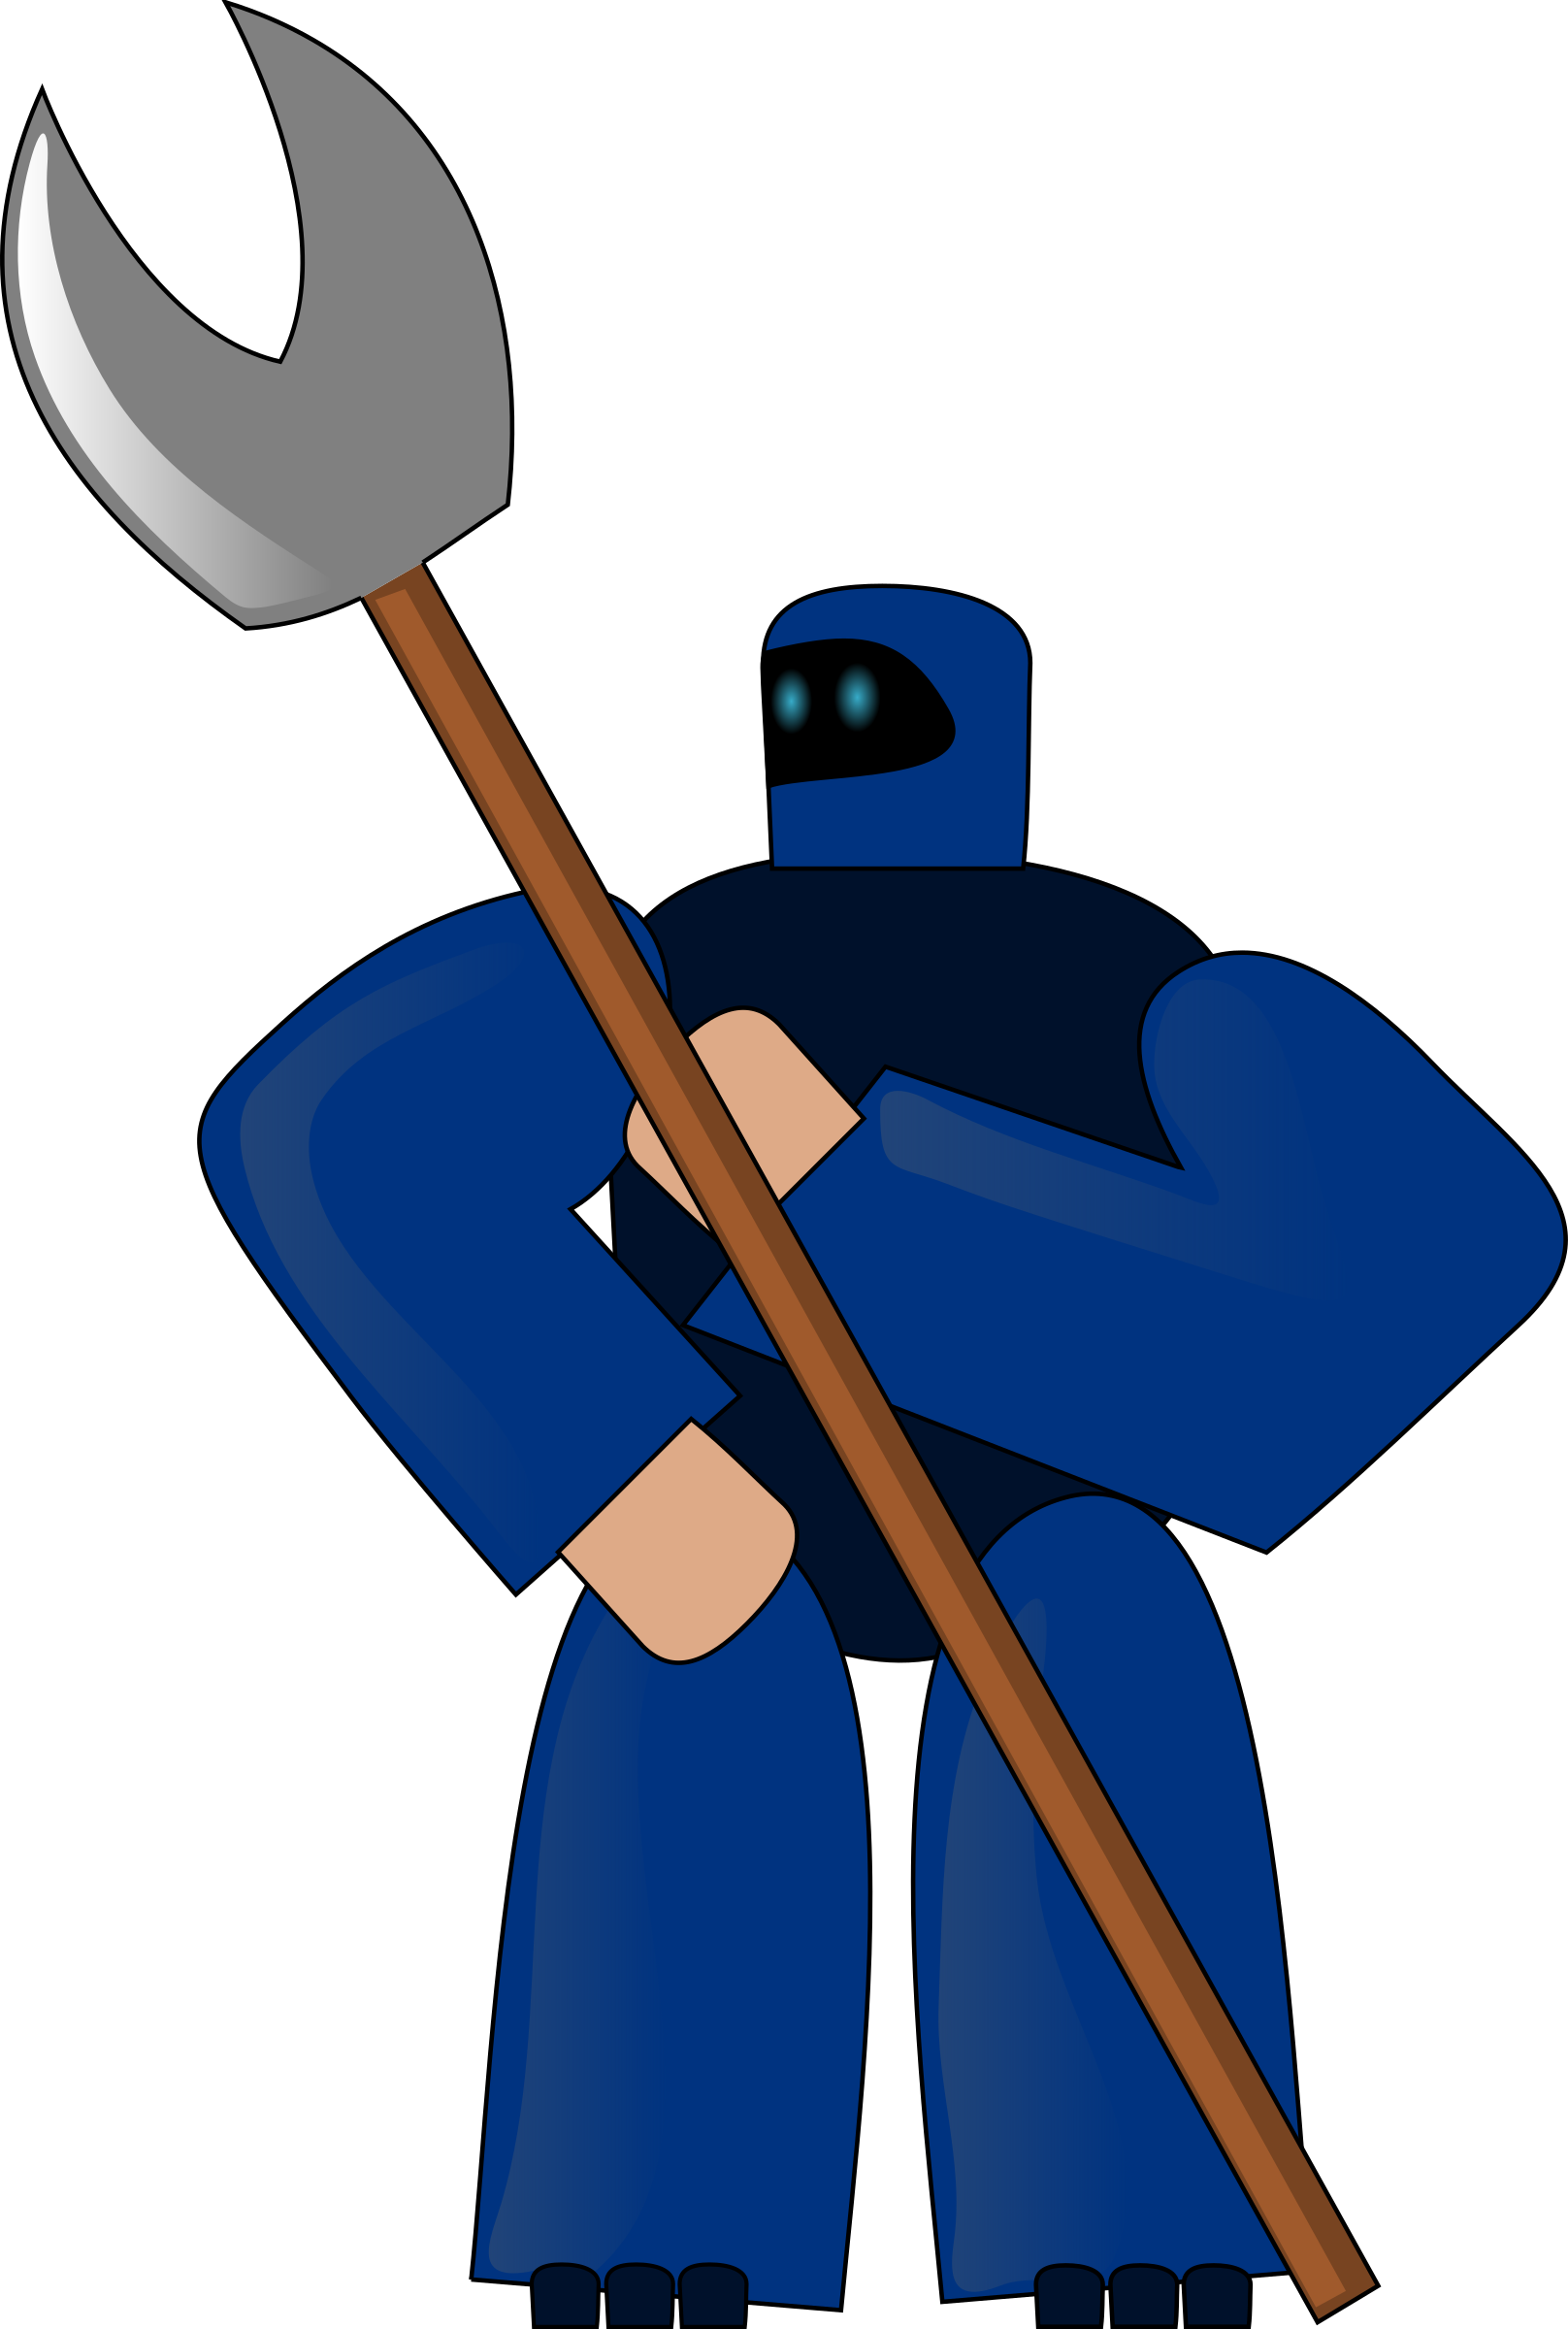 Download Blue Robot with Axe vector clipart image - Free stock ...